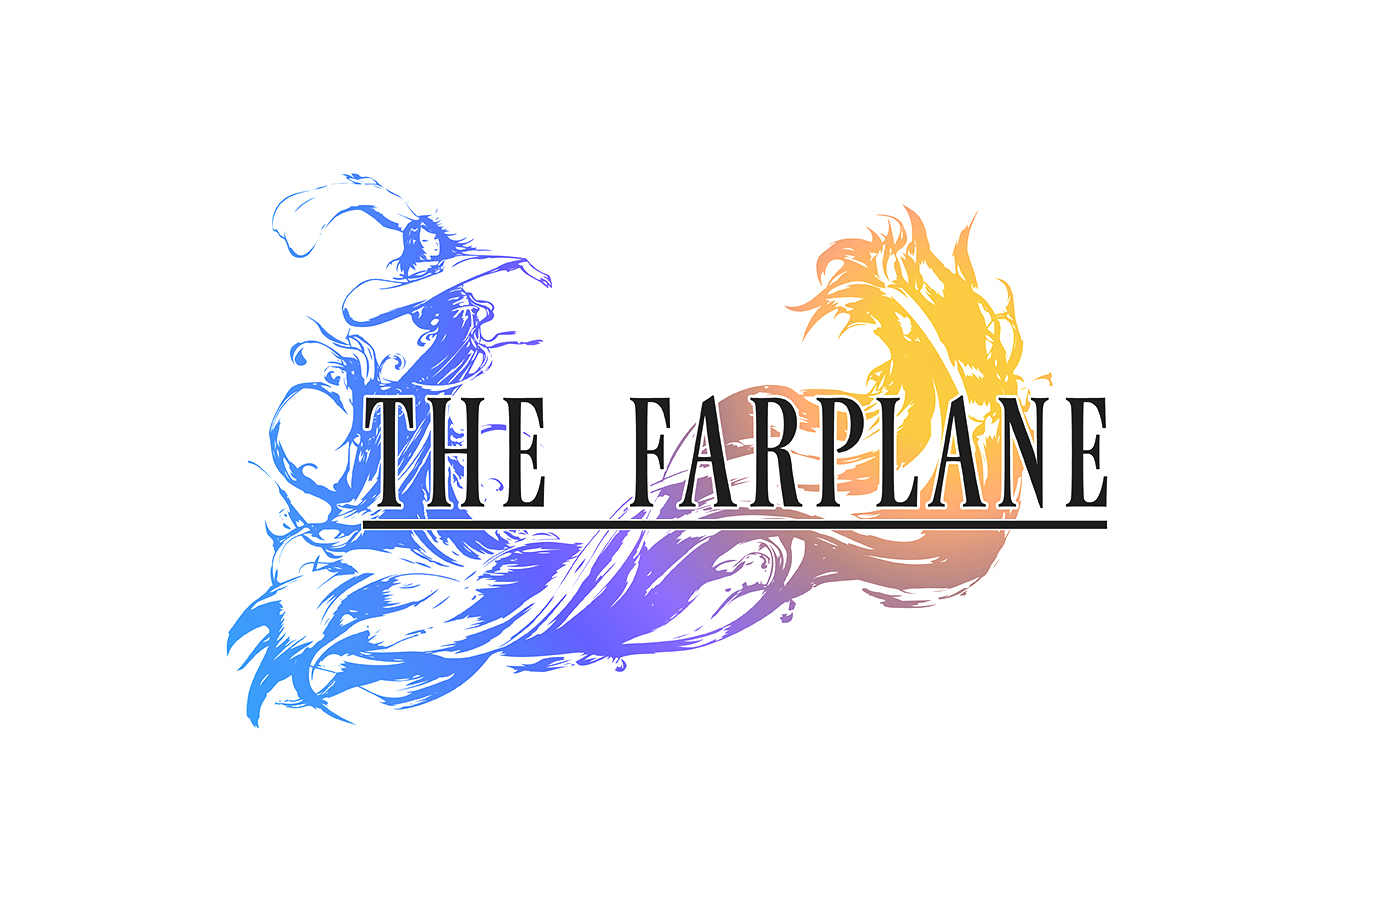 Logo saying 'The Farplane' in the style of Final Fantasy 10